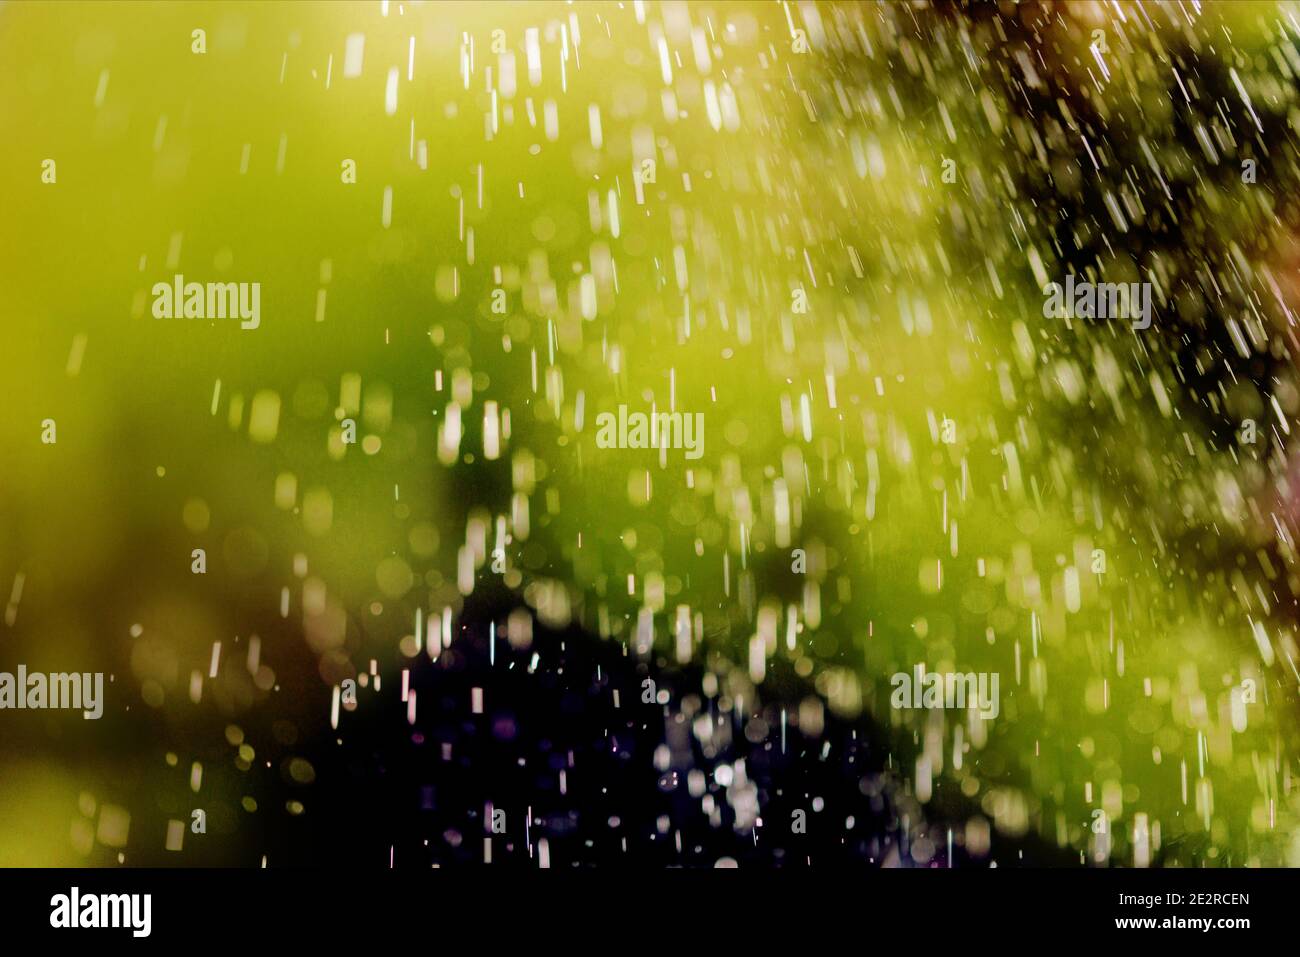 art, abstract spring background. green defocus bokeh background. Drops dew or rain. Design element.drops of flying rain.Isolate on black. Stock Photo